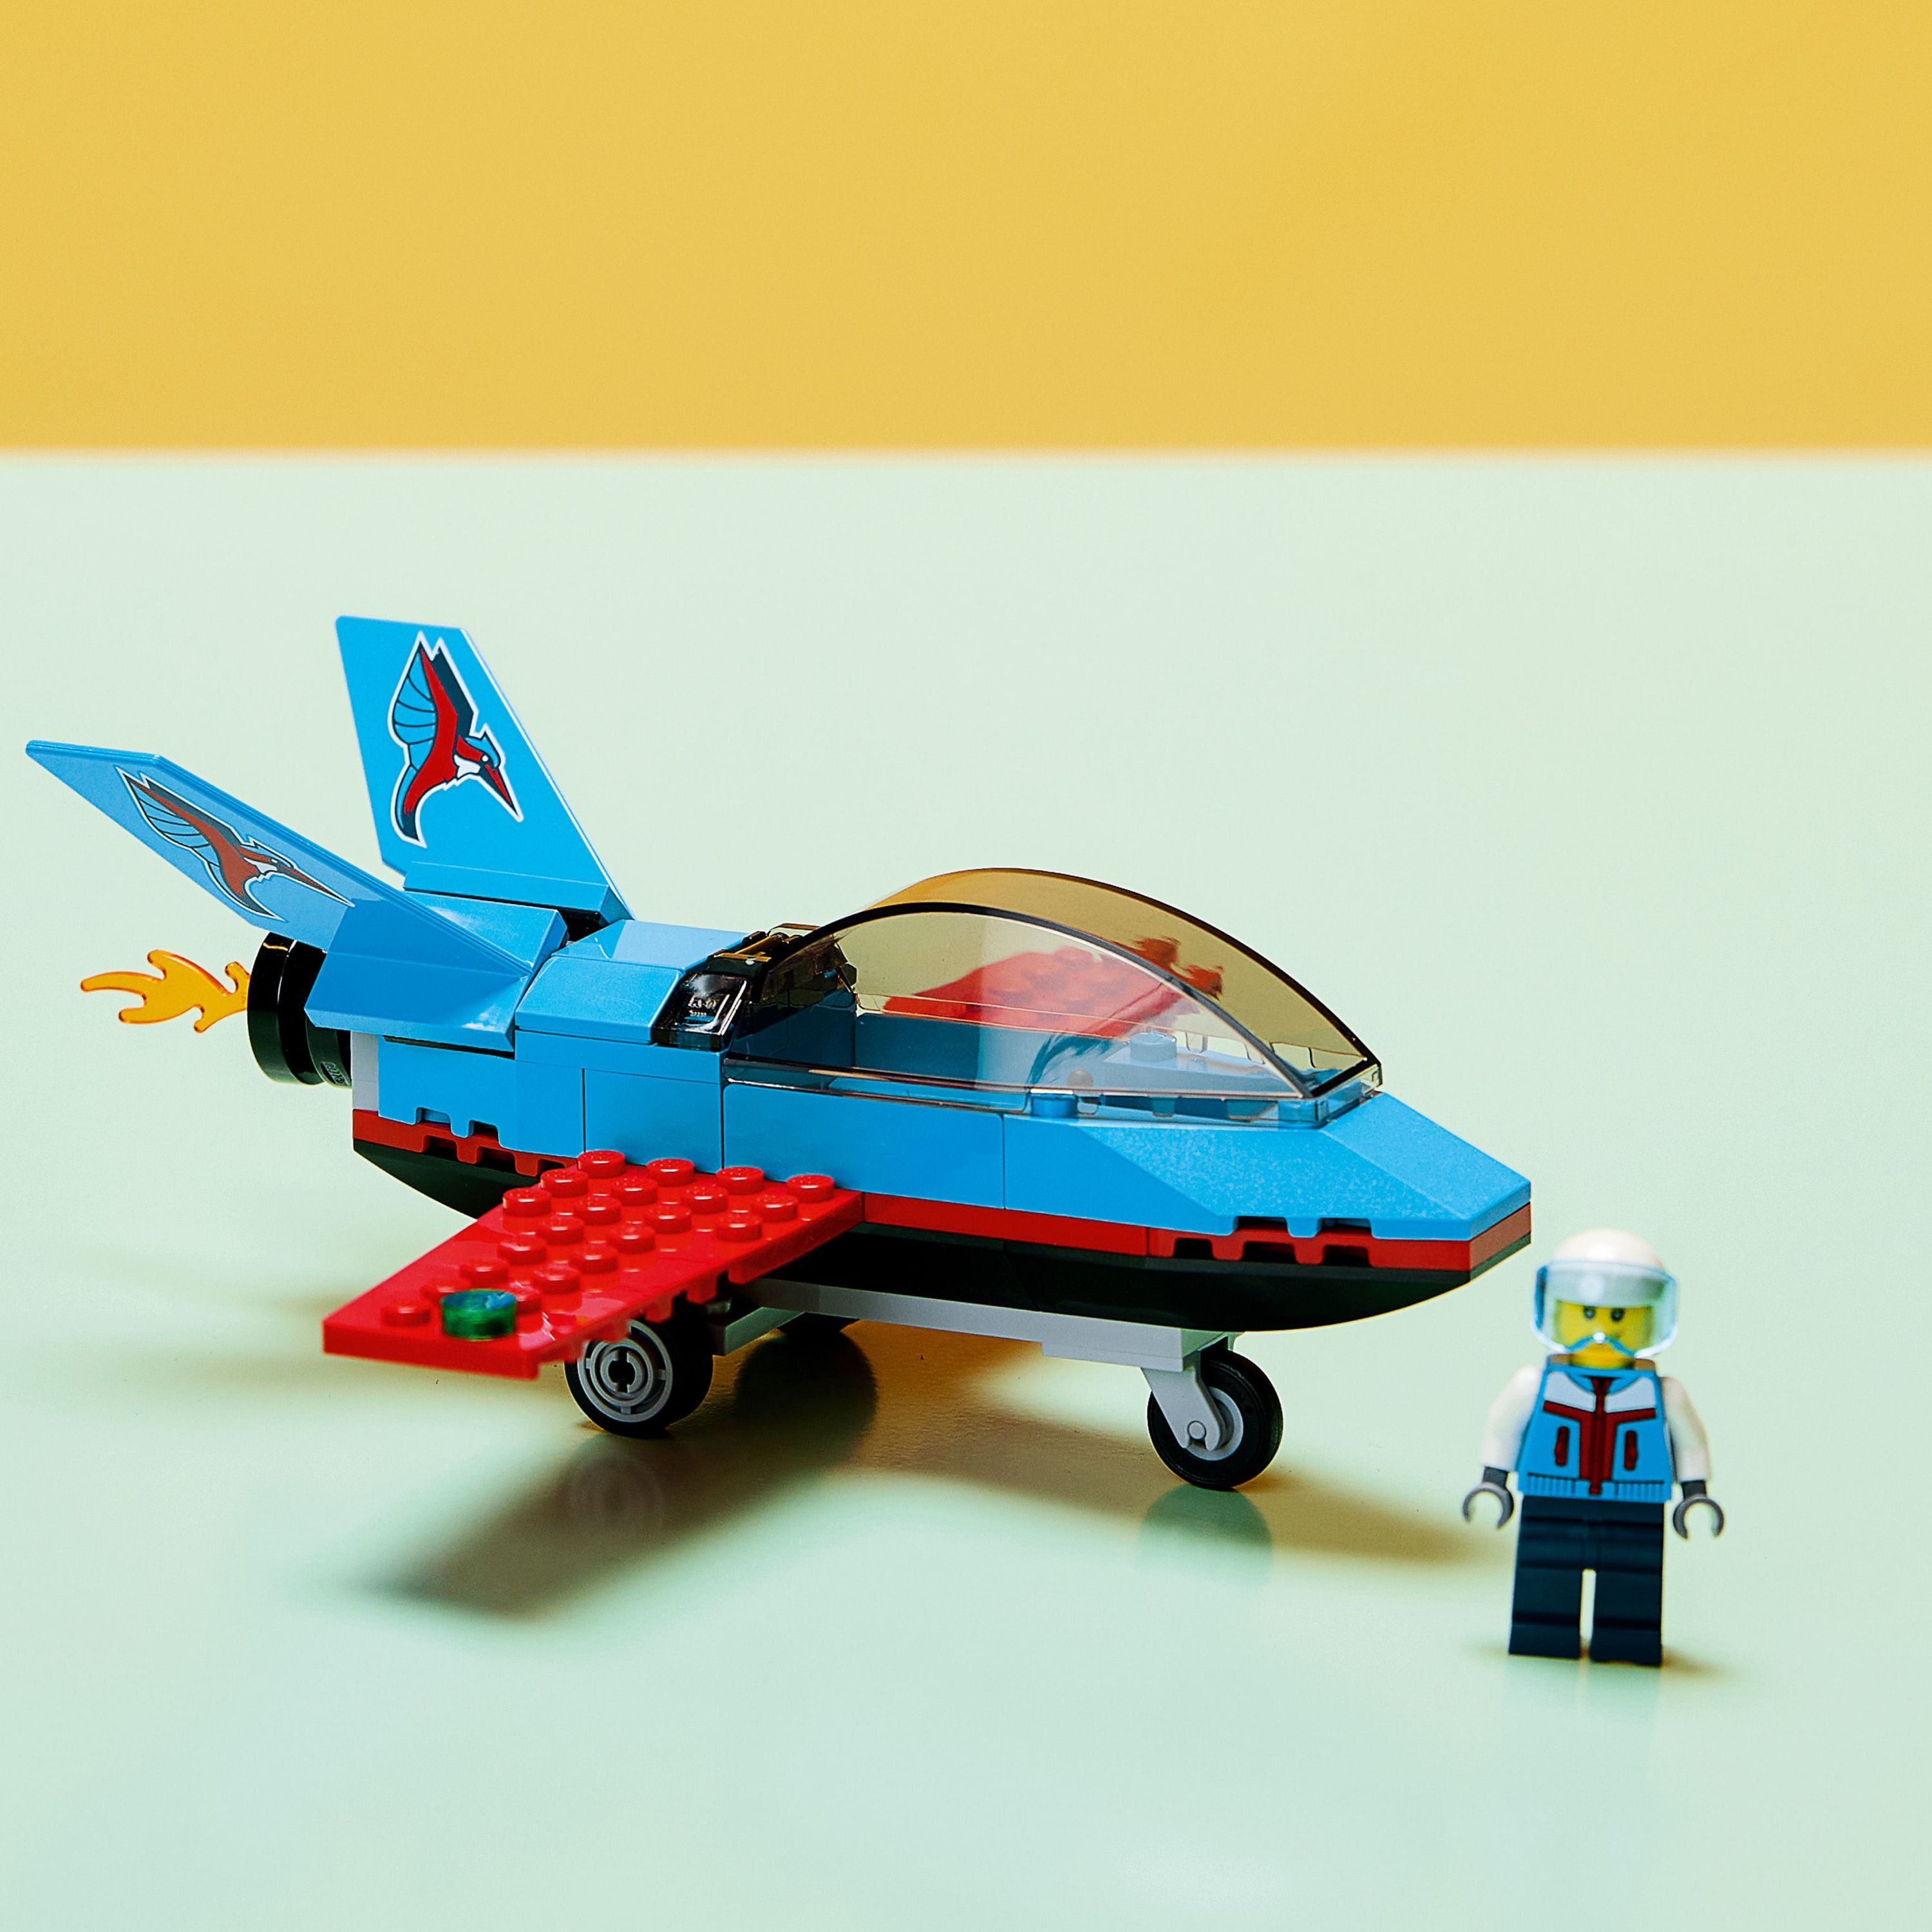 Minifigure Girls Vehicles 60323 and Gifts Jet Airplane Building 2022 Plane Kids, 5 with for City LEGO Pilot Old Years plus Stunt Boys Great Toy, Set,